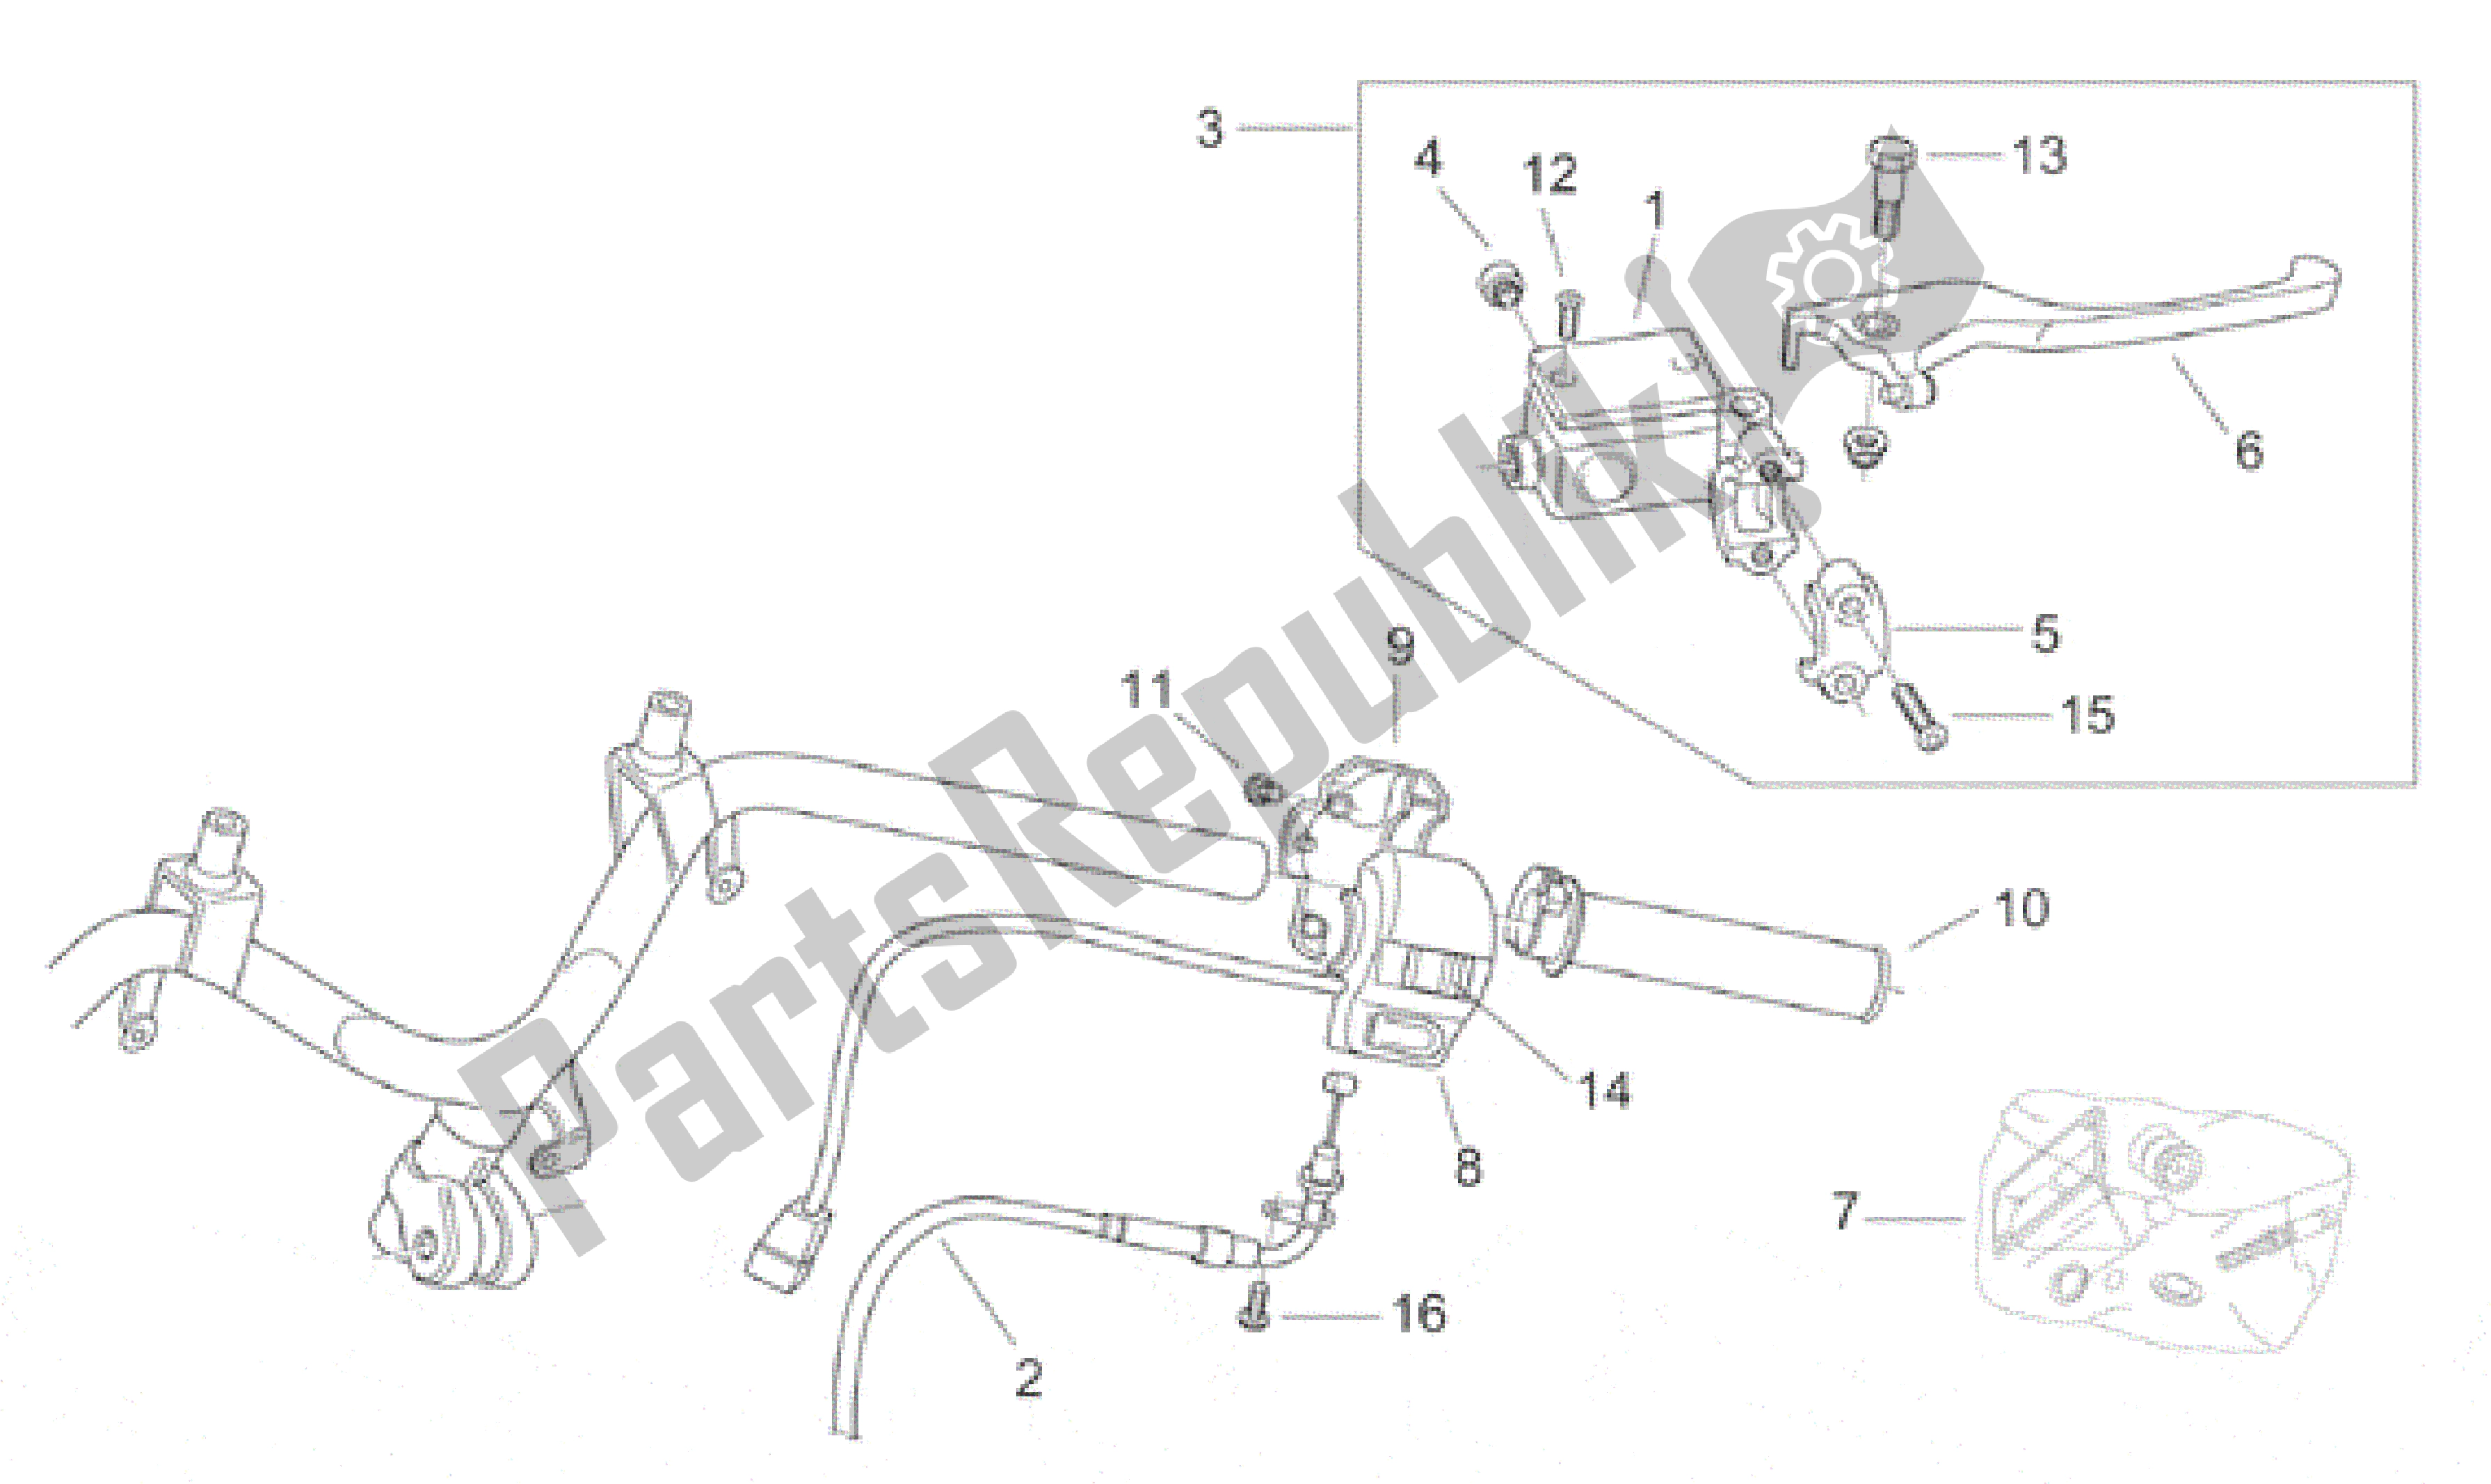 All parts for the Rh Controls of the Aprilia Scarabeo 50 2000 - 2005